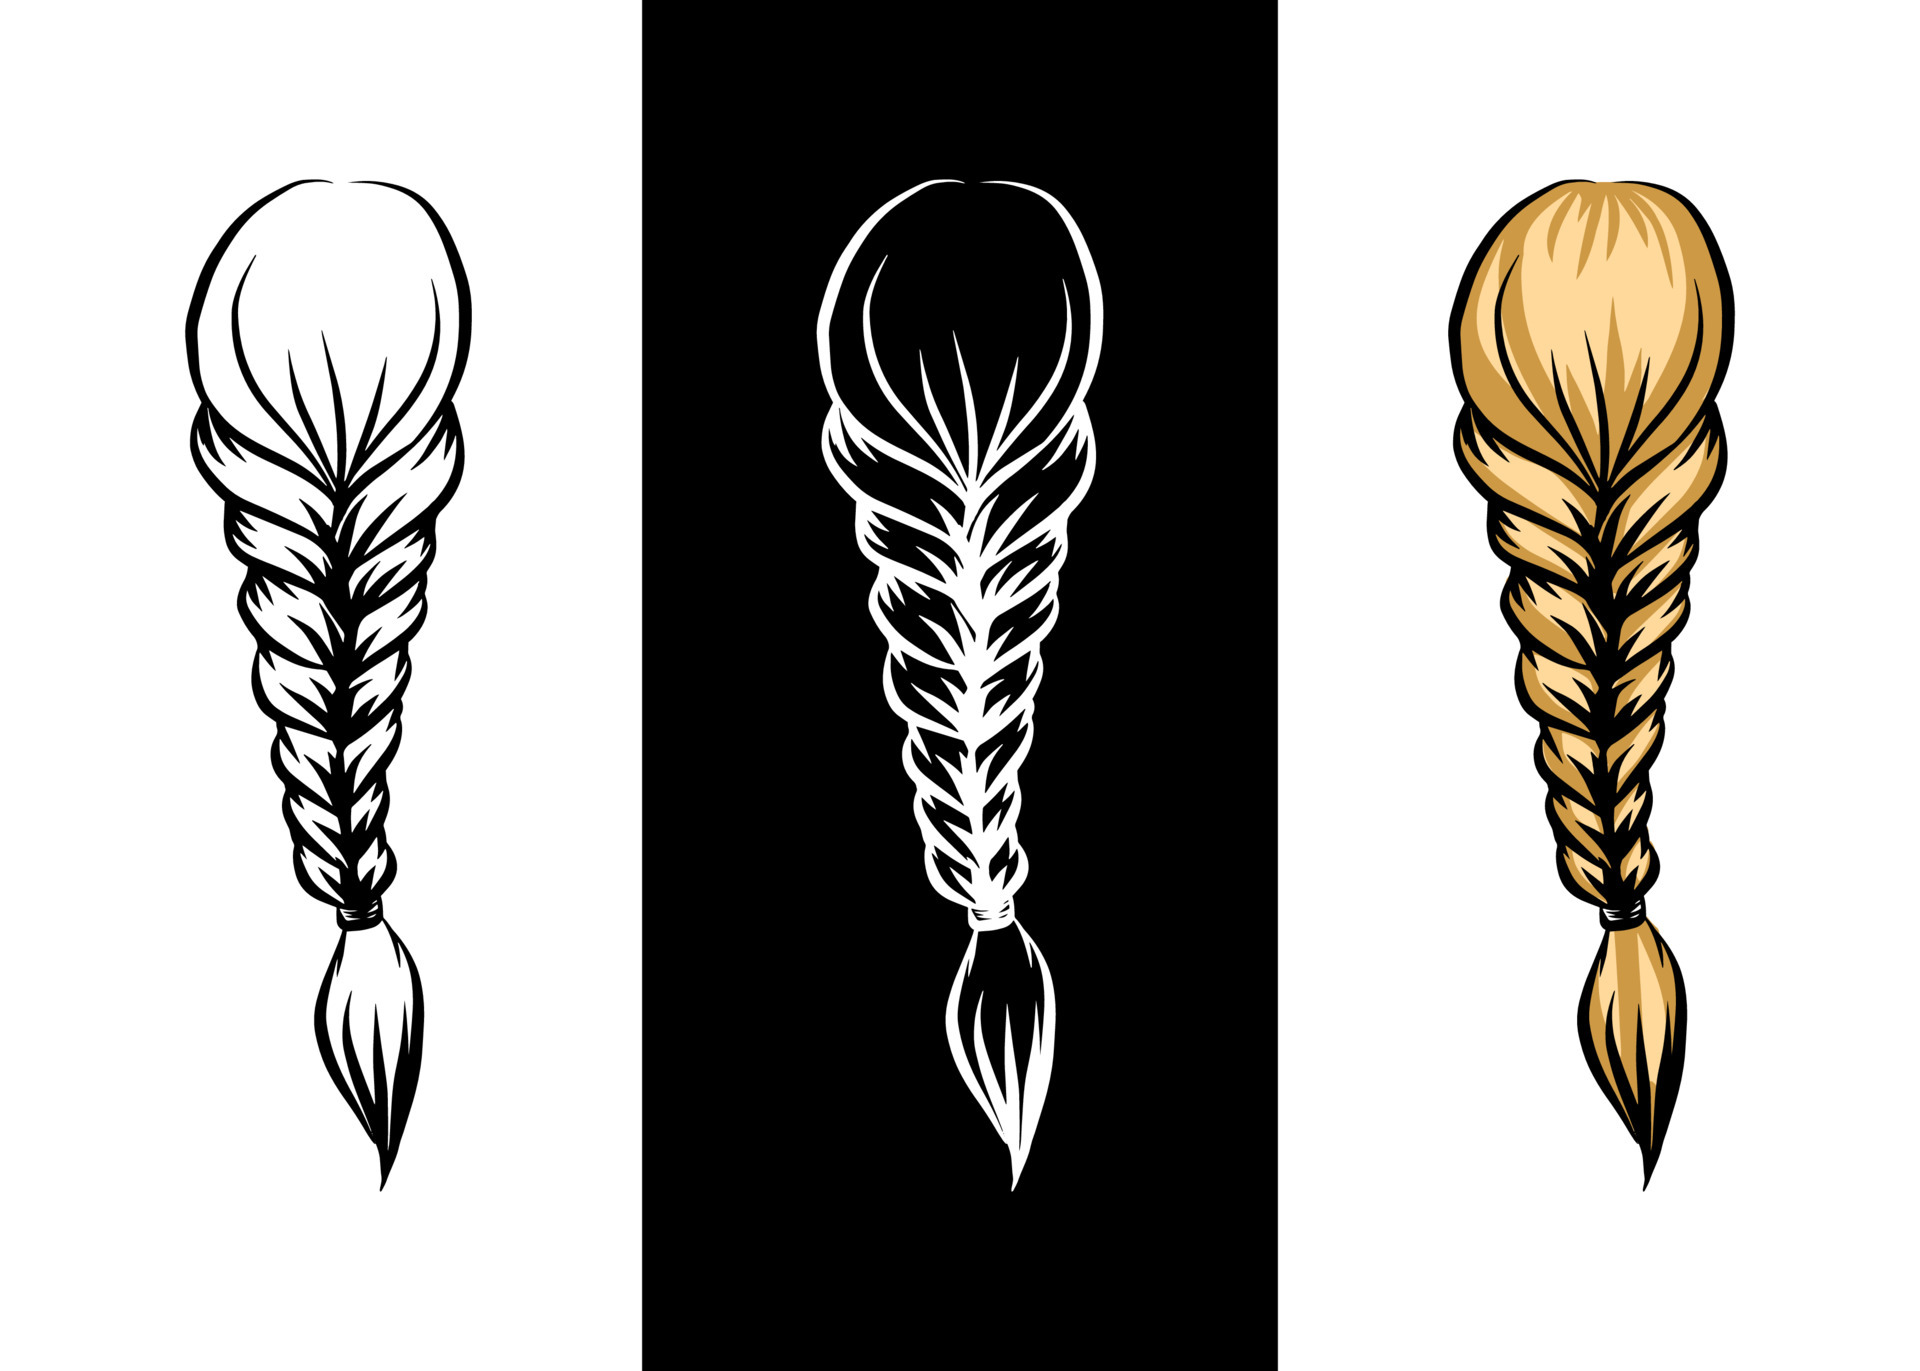 https://static.vecteezy.com/system/resources/previews/005/464/312/original/beautiful-lady-hairstyle-braid-icon-set-isolated-doodle-drawing-outline-sketch-graphic-logo-design-beauty-salon-hair-flat-line-art-sign-braided-hairdo-simple-flat-black-vector.jpg